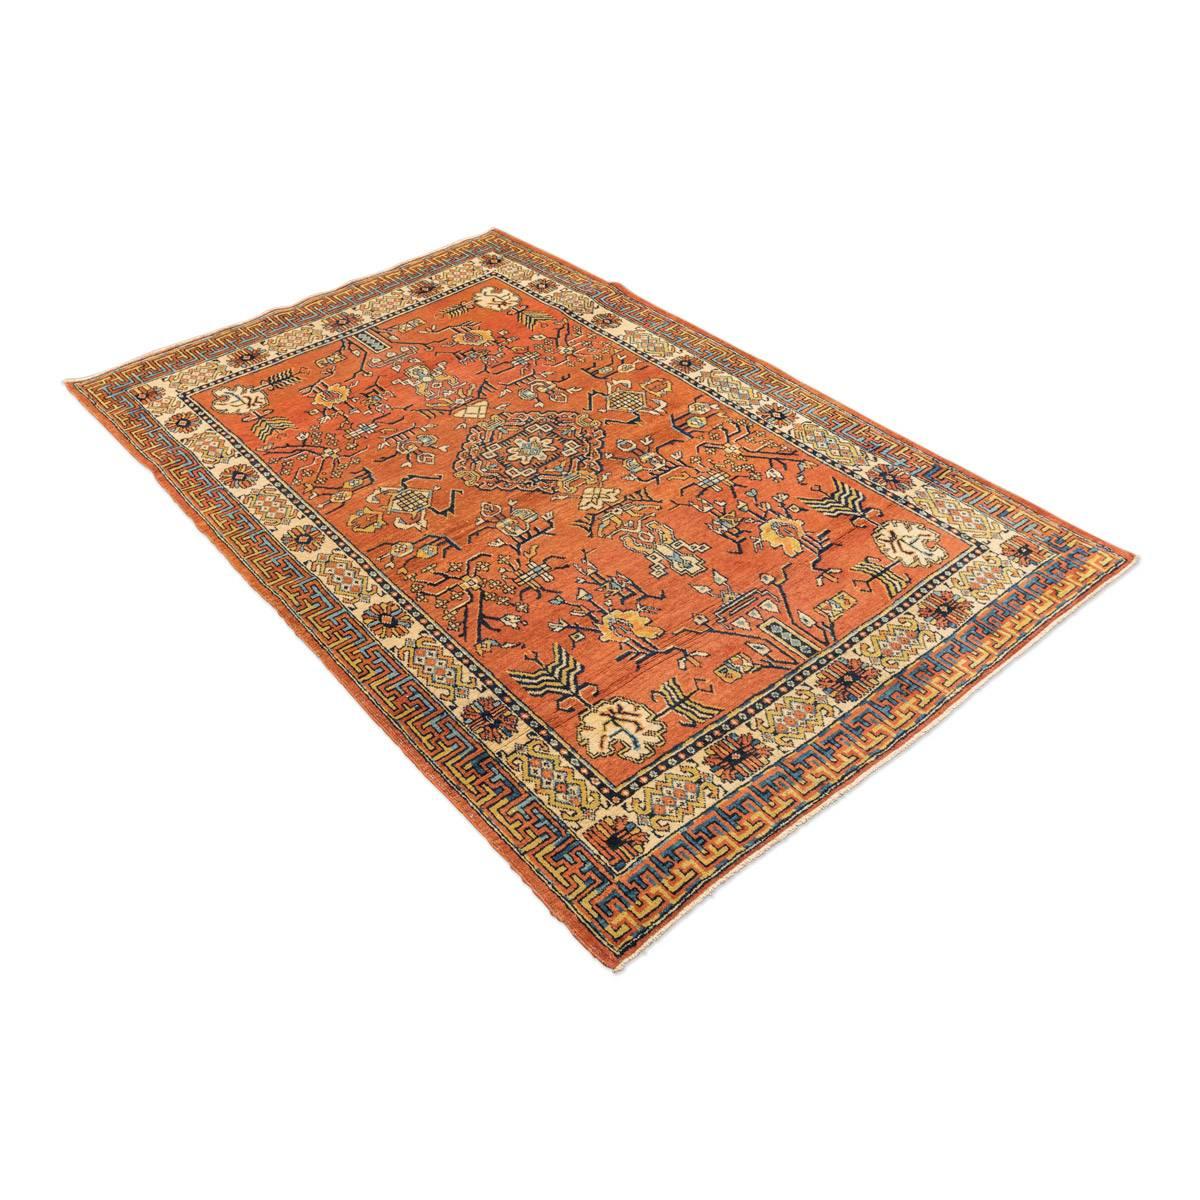 Samarkand rug, Kothan design with influences of Chinese rugs and of de ancient silk road, circa 1900.
- We highlight the quality of the conservation of colors.
- Colors in caramel tones.
- Geometric leaves and flowers make up the central field.
-